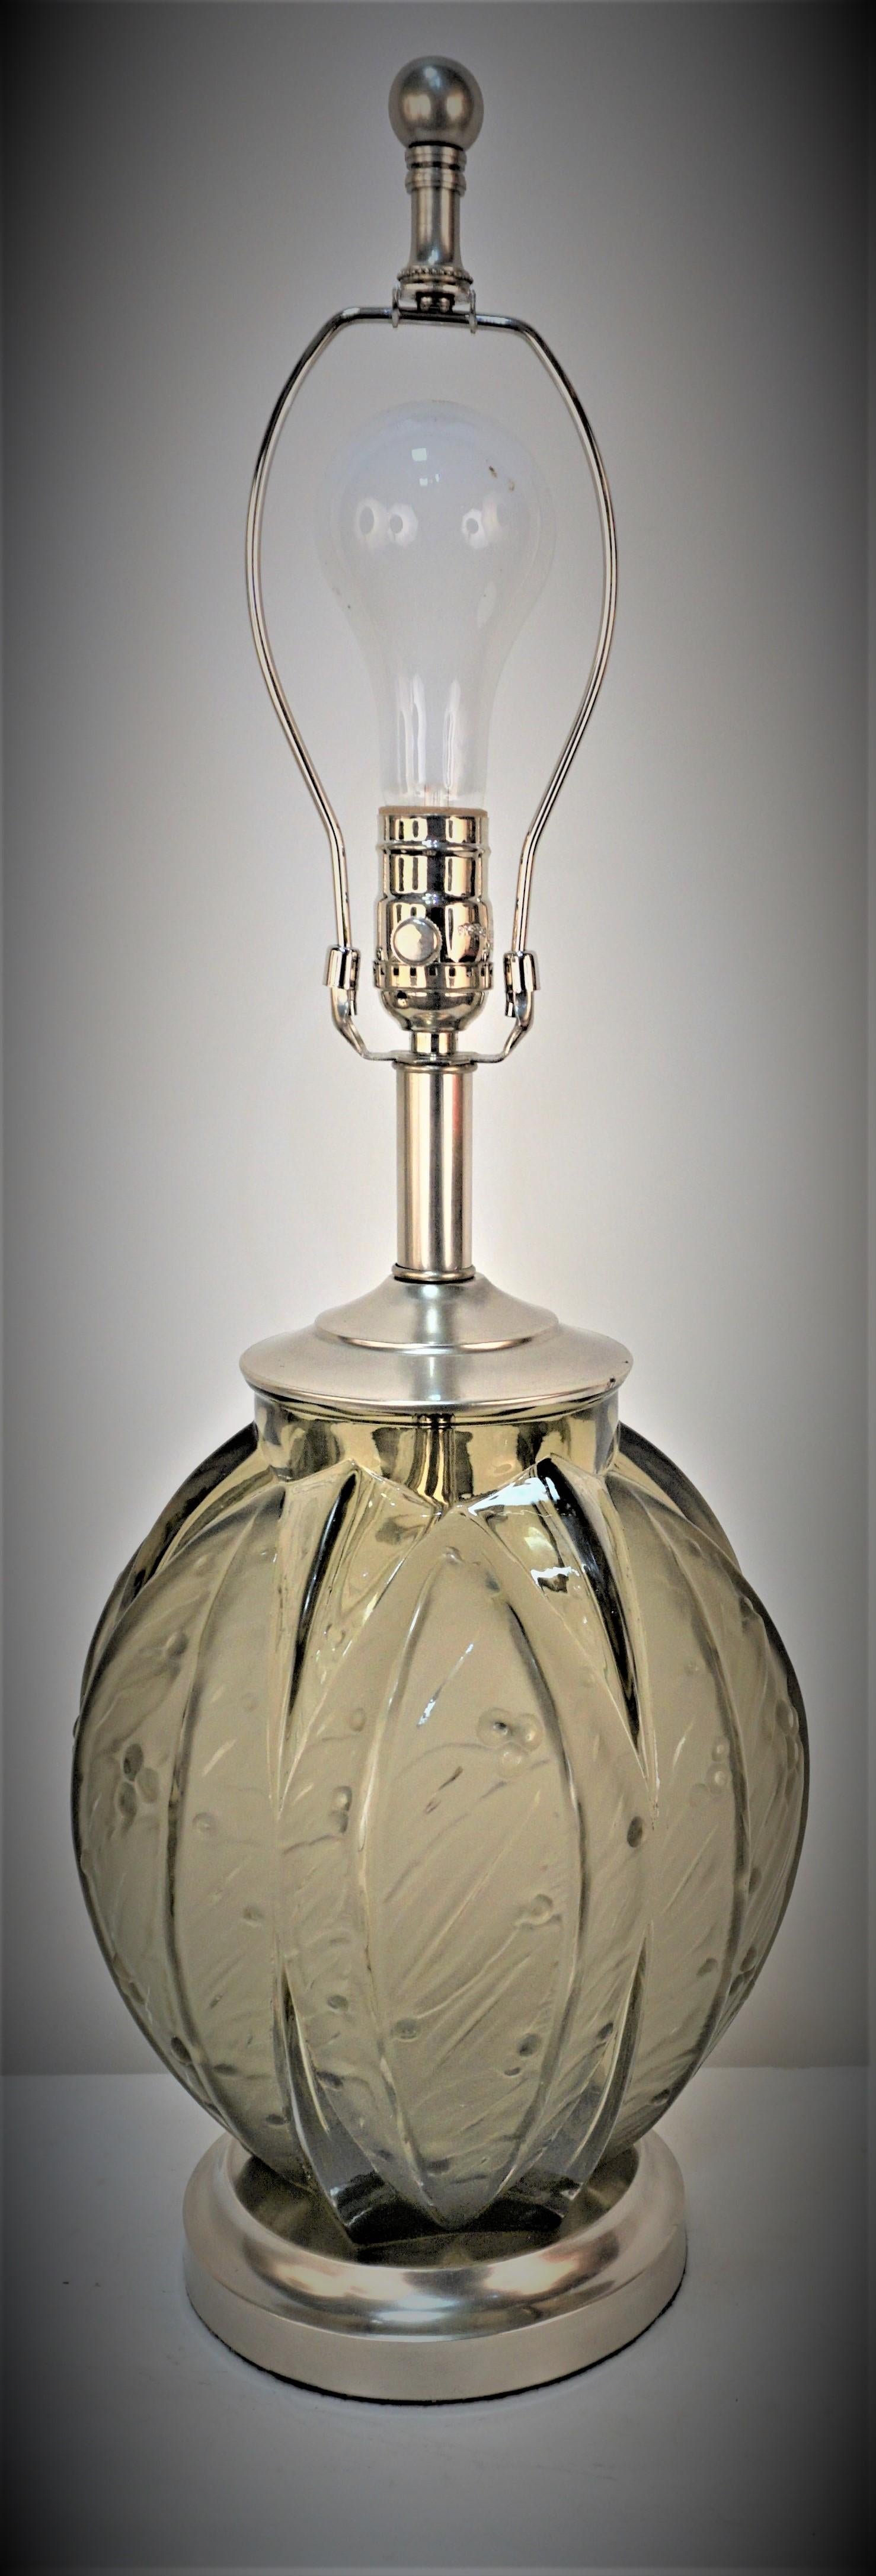 French 1930's Art Deco Glass Table Lamp In Good Condition For Sale In Fairfax, VA